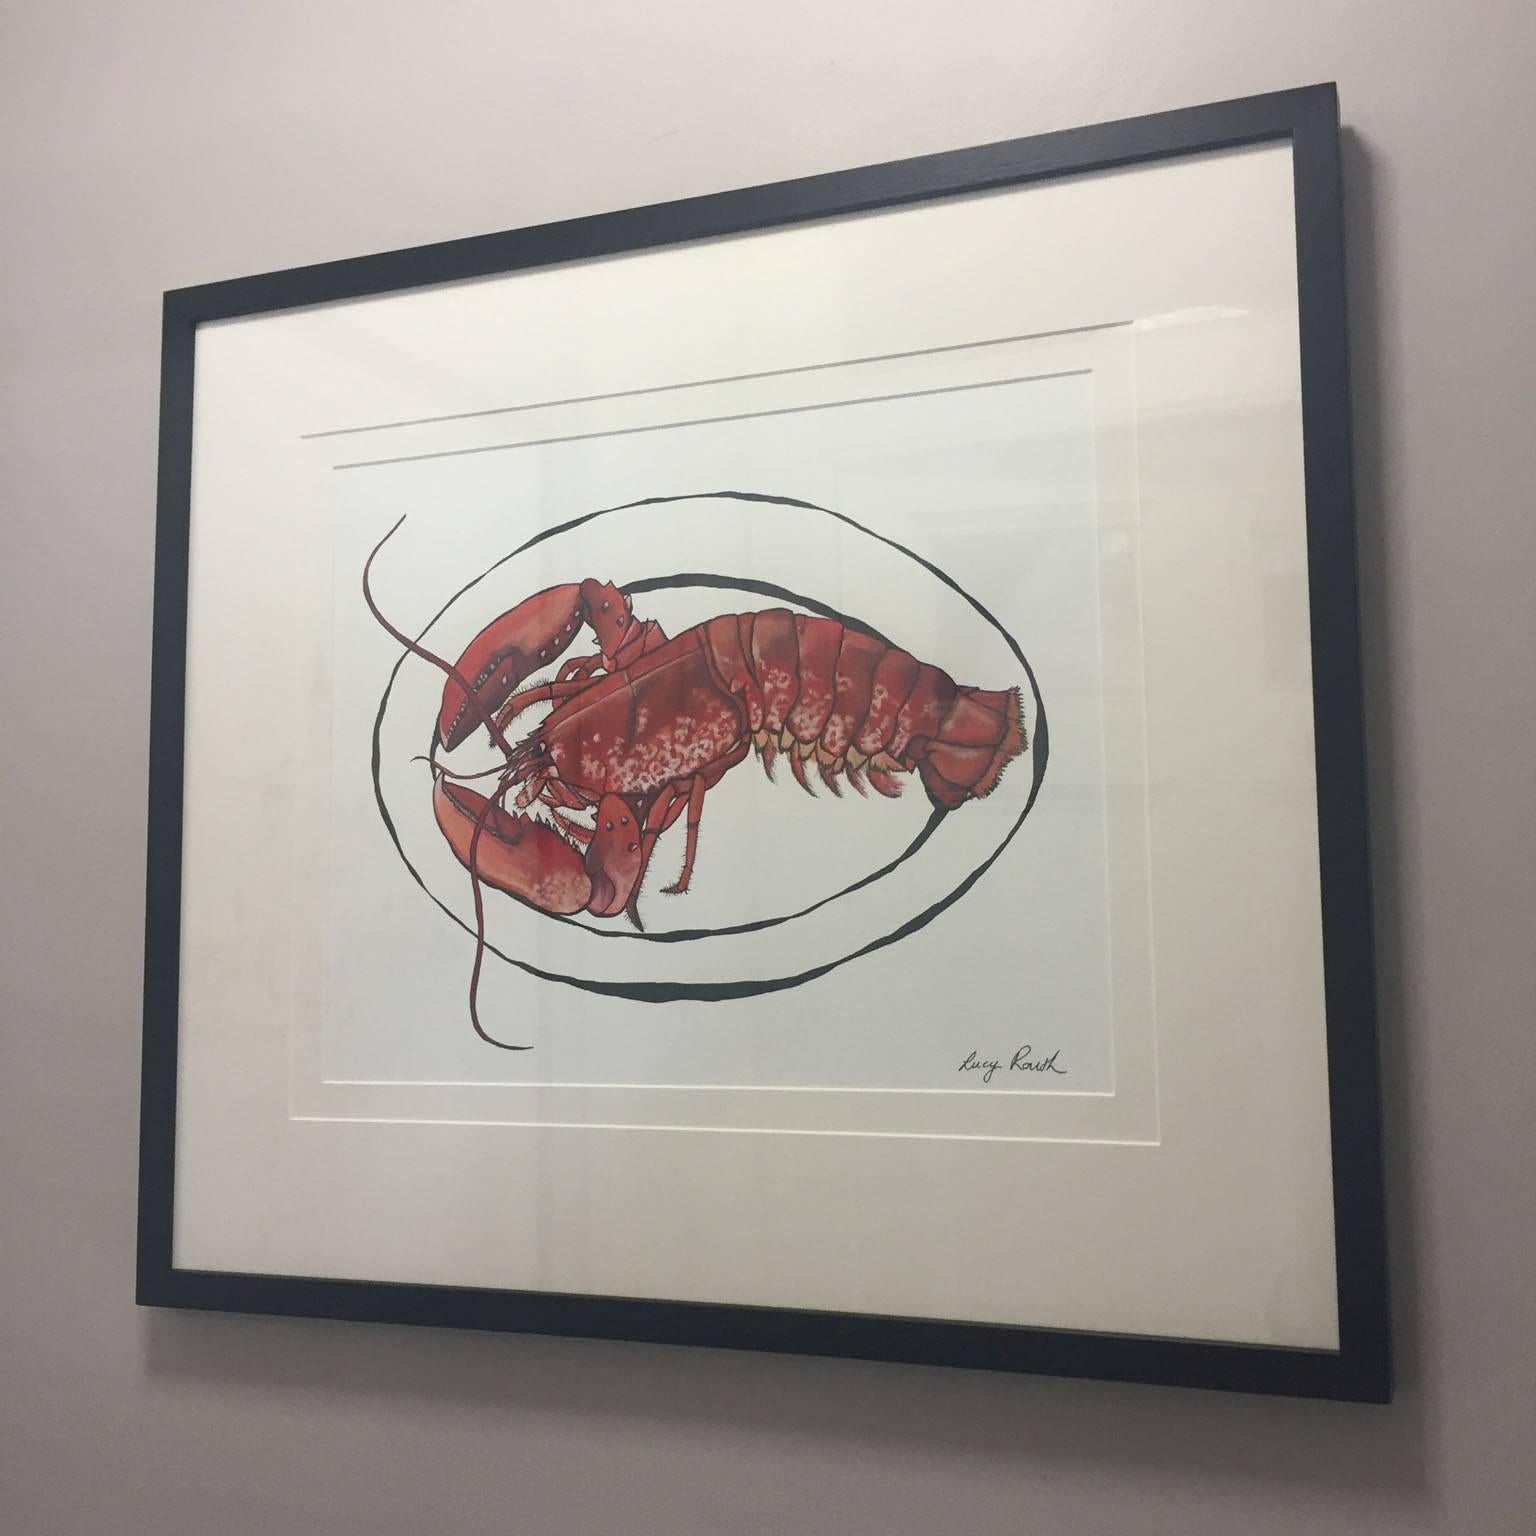 Lucy Routh – Dartmouth Lobster

Original work in acrylic paint and ink on canvas textured paper. Inspired by nature and the beauty found in everyday objects. I combine traditional still life subjects with a contemporary style, achieving bold,